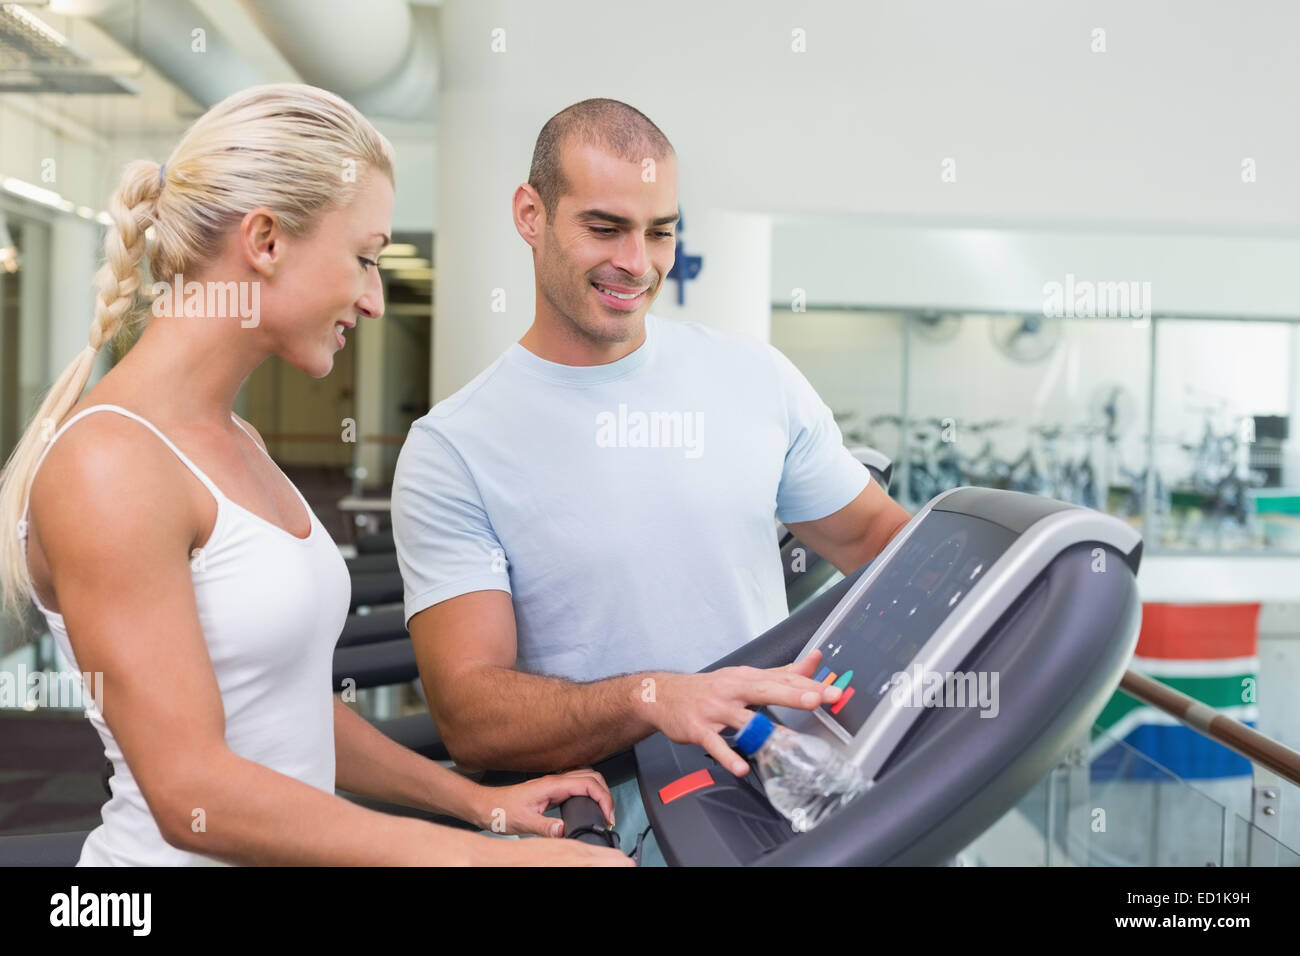 Trainer assisting woman with treadmill screen options at gym Stock ...